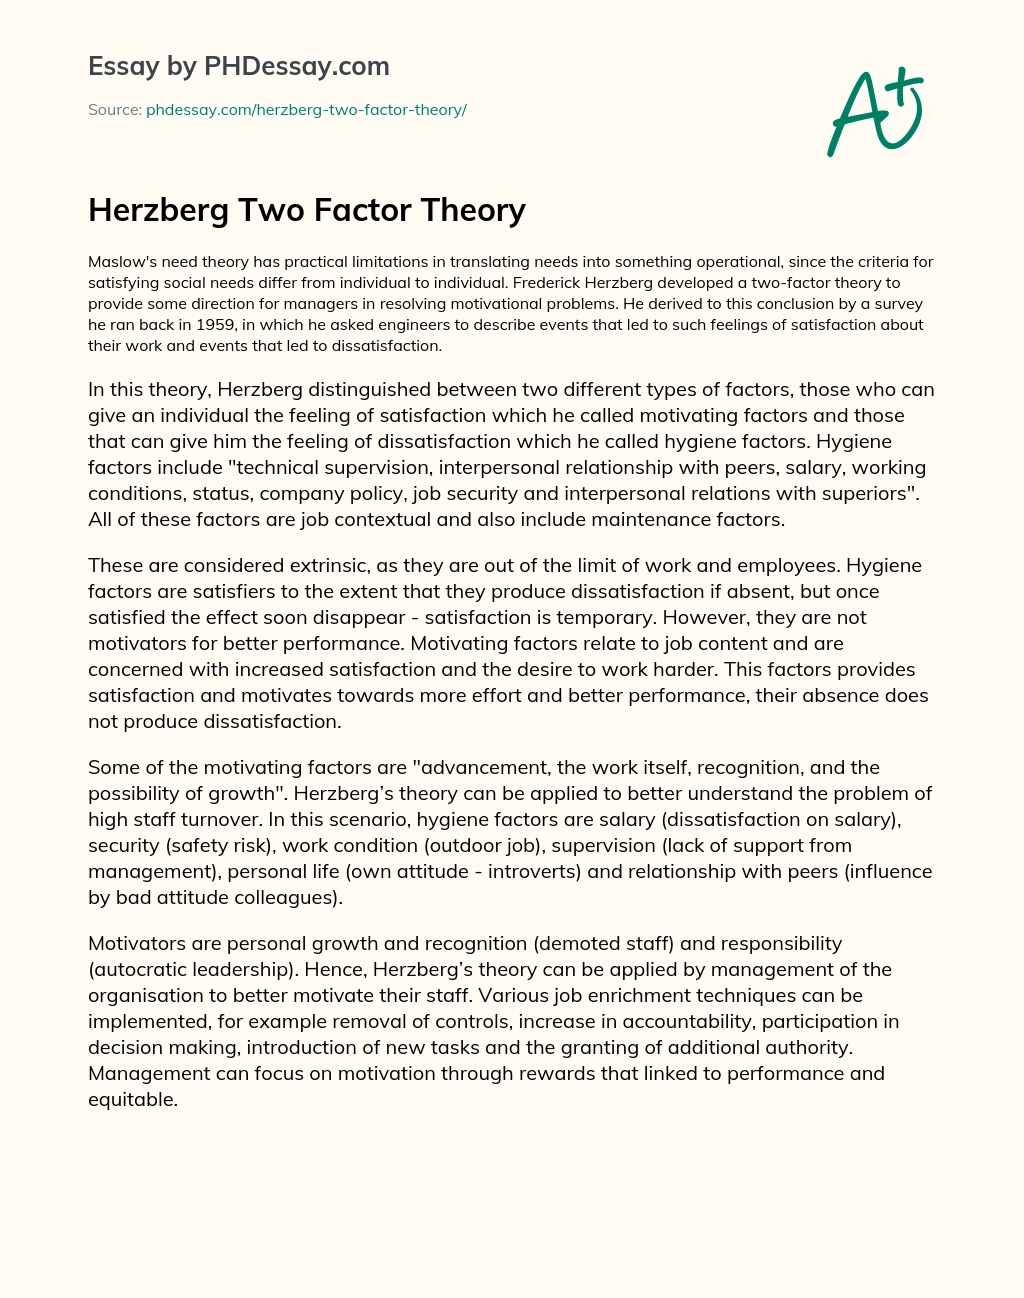 Herzberg Two Factor Theory essay